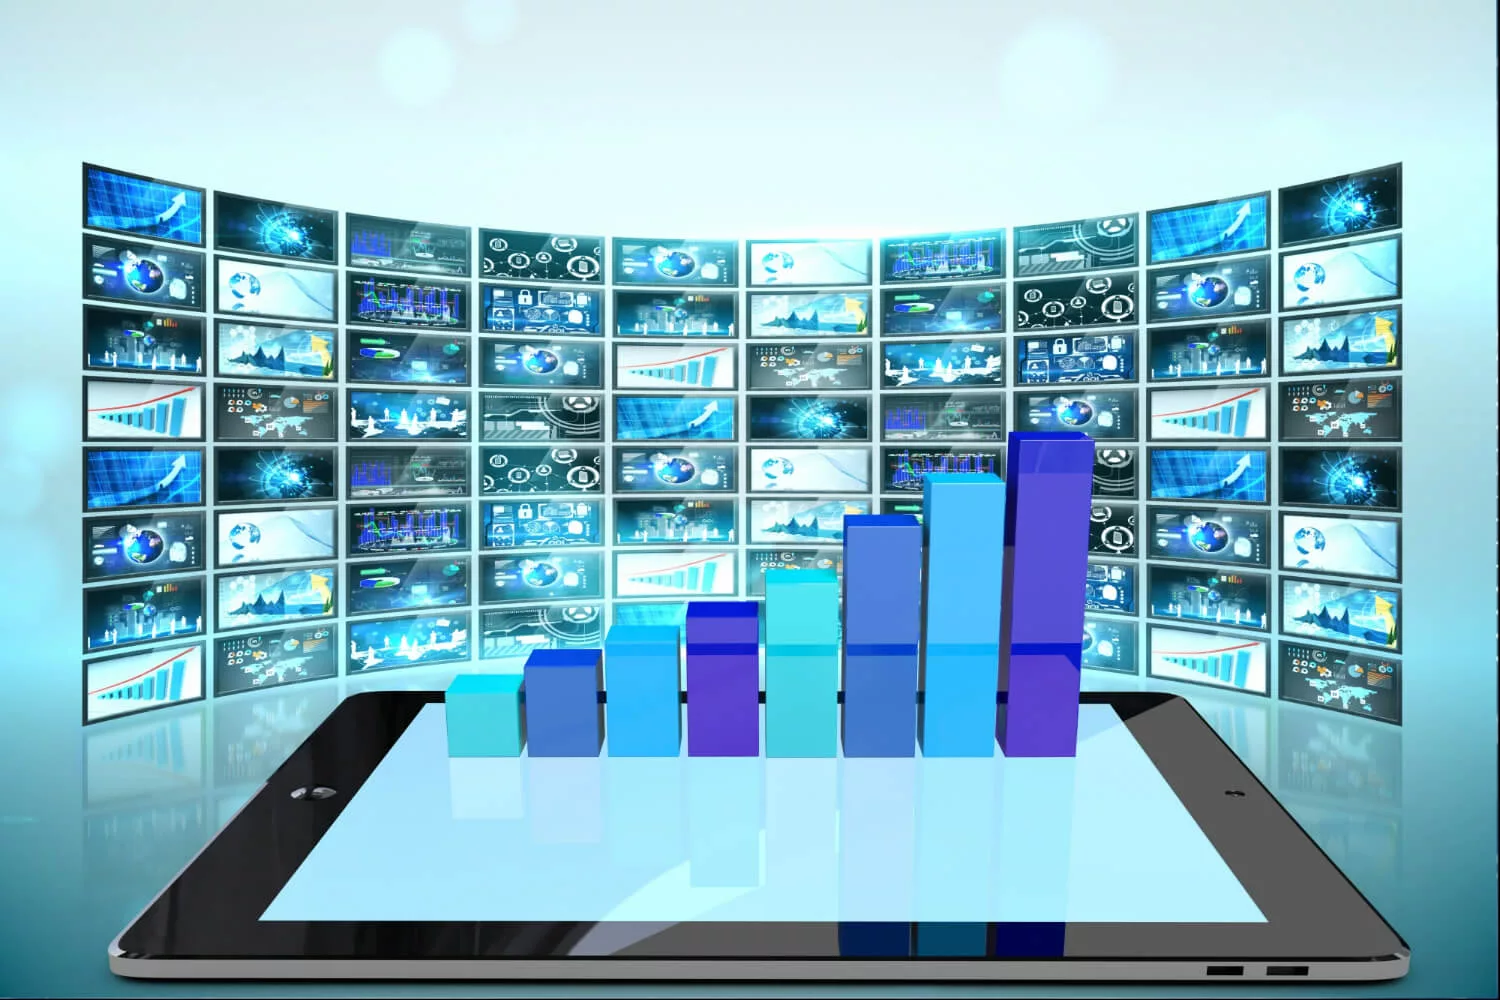 51 Video Streaming Stats to Accelerate Your Content Business